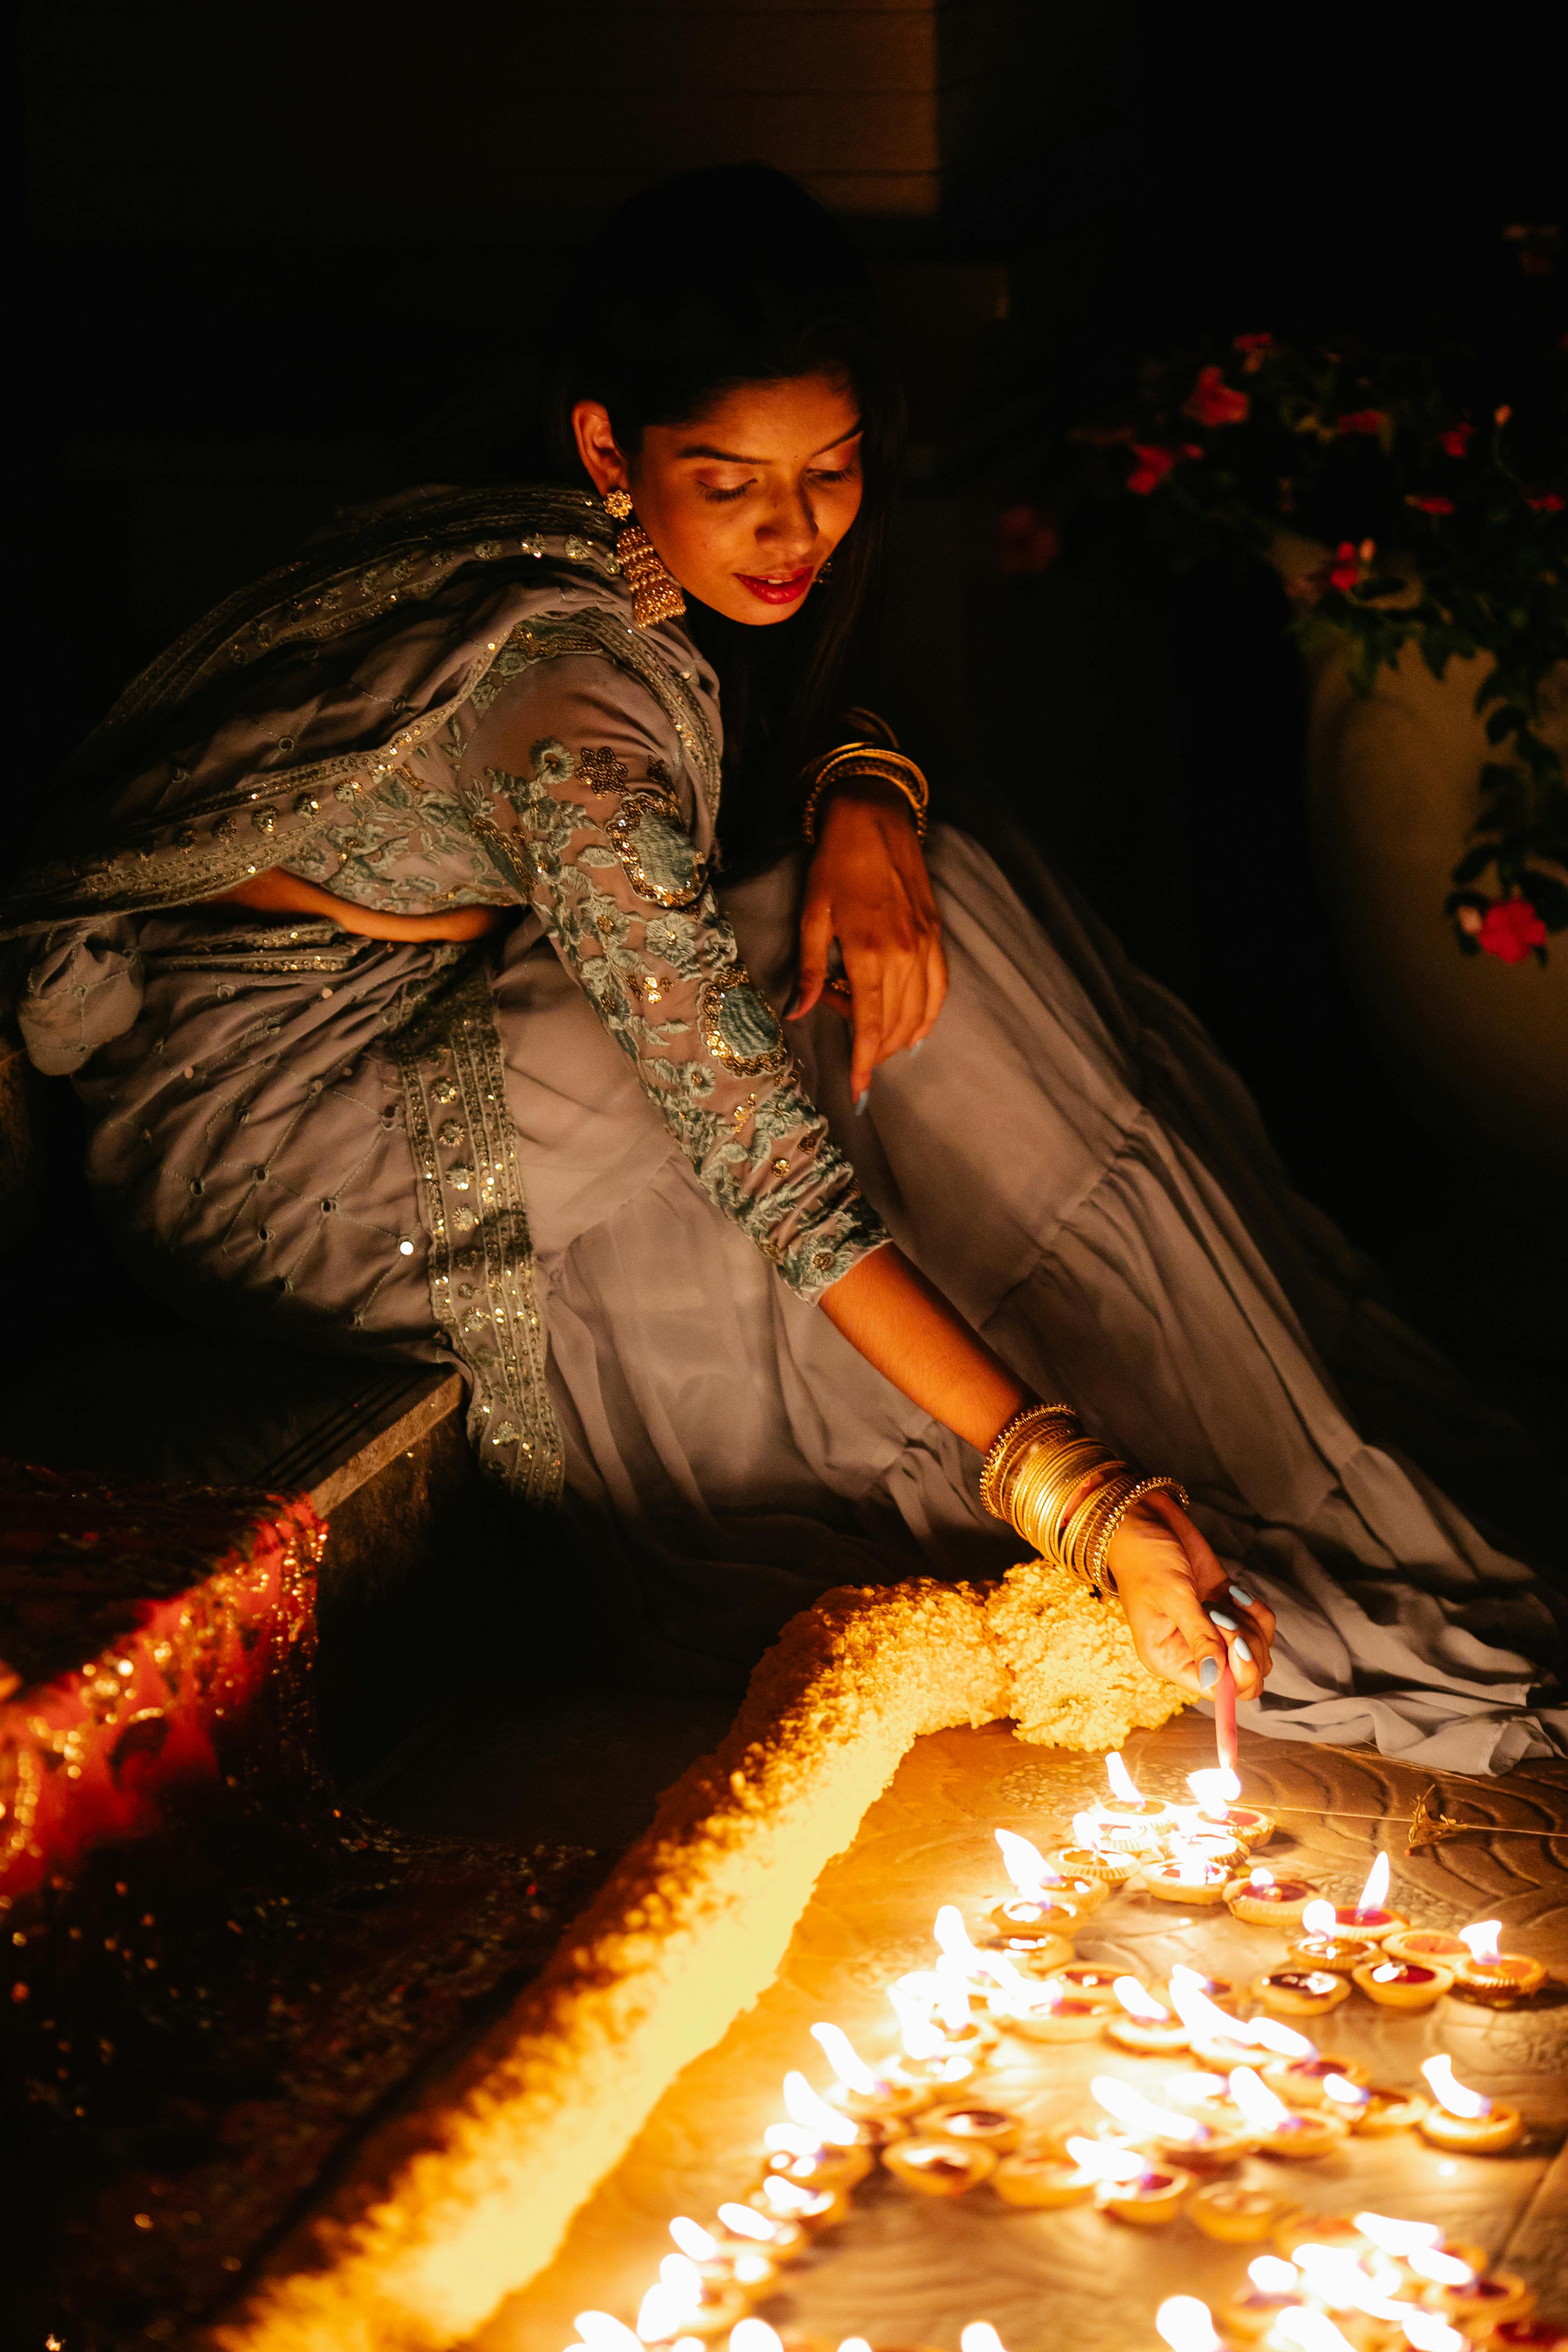 Free Photos - A Beautiful Indian Woman Dressed In Traditional Garb, Adorned  With Jewelry, And Holding A Lit Candle In Her Hands. She Appears To Be  Posing For A Photo, Exuding An